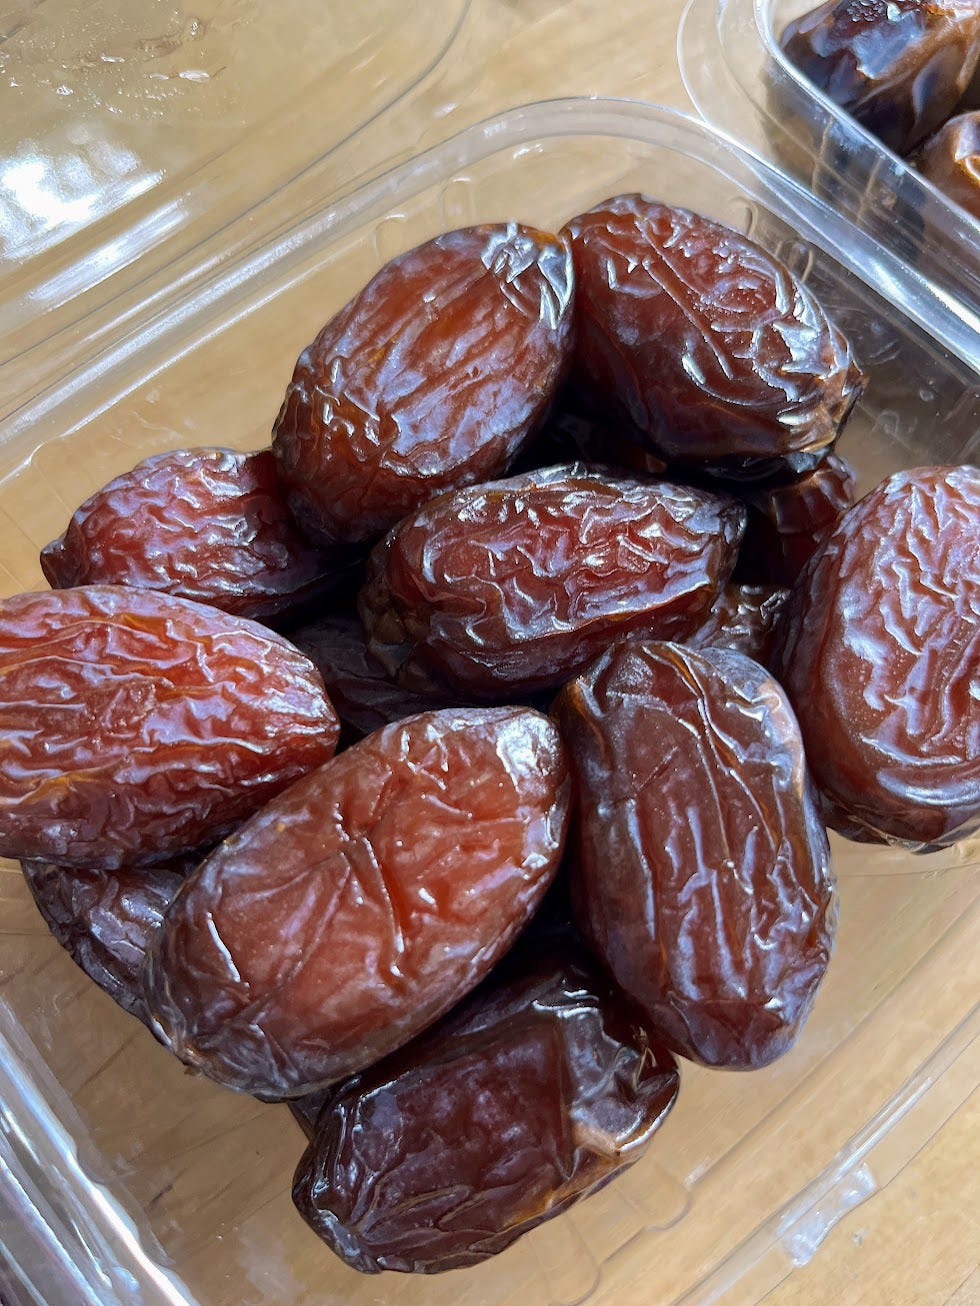 Open container of Medjool dates